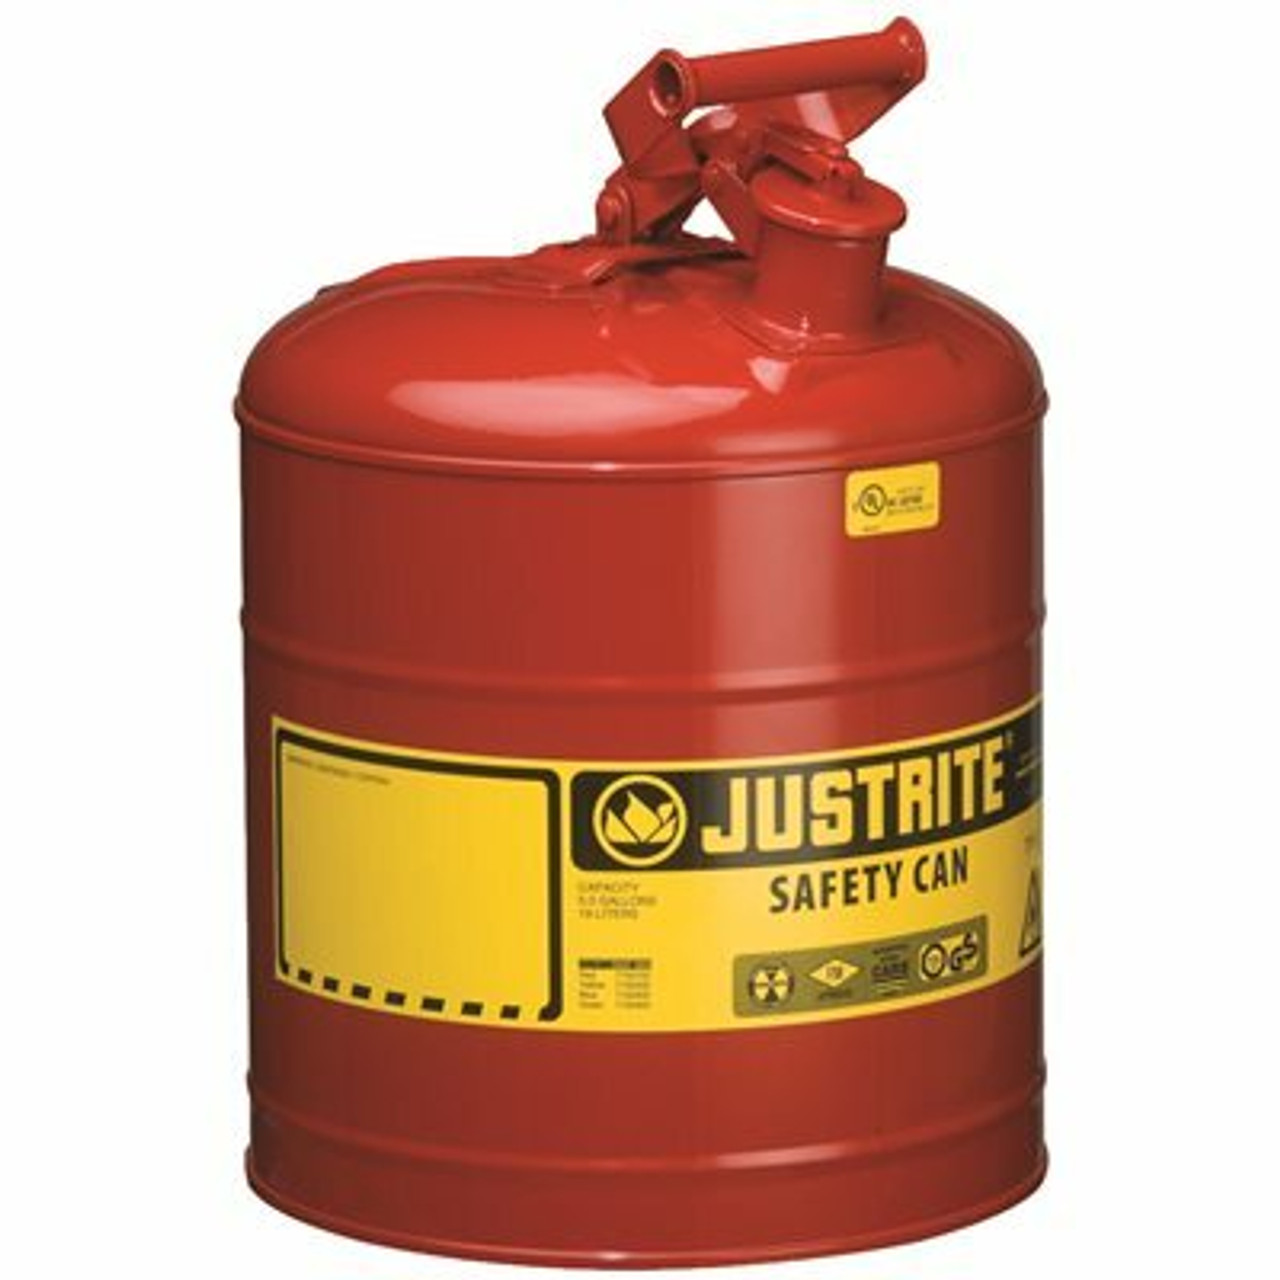 Justrite Mfg Type 1 Red Steel Safety Can For Flammables 5 Gallon